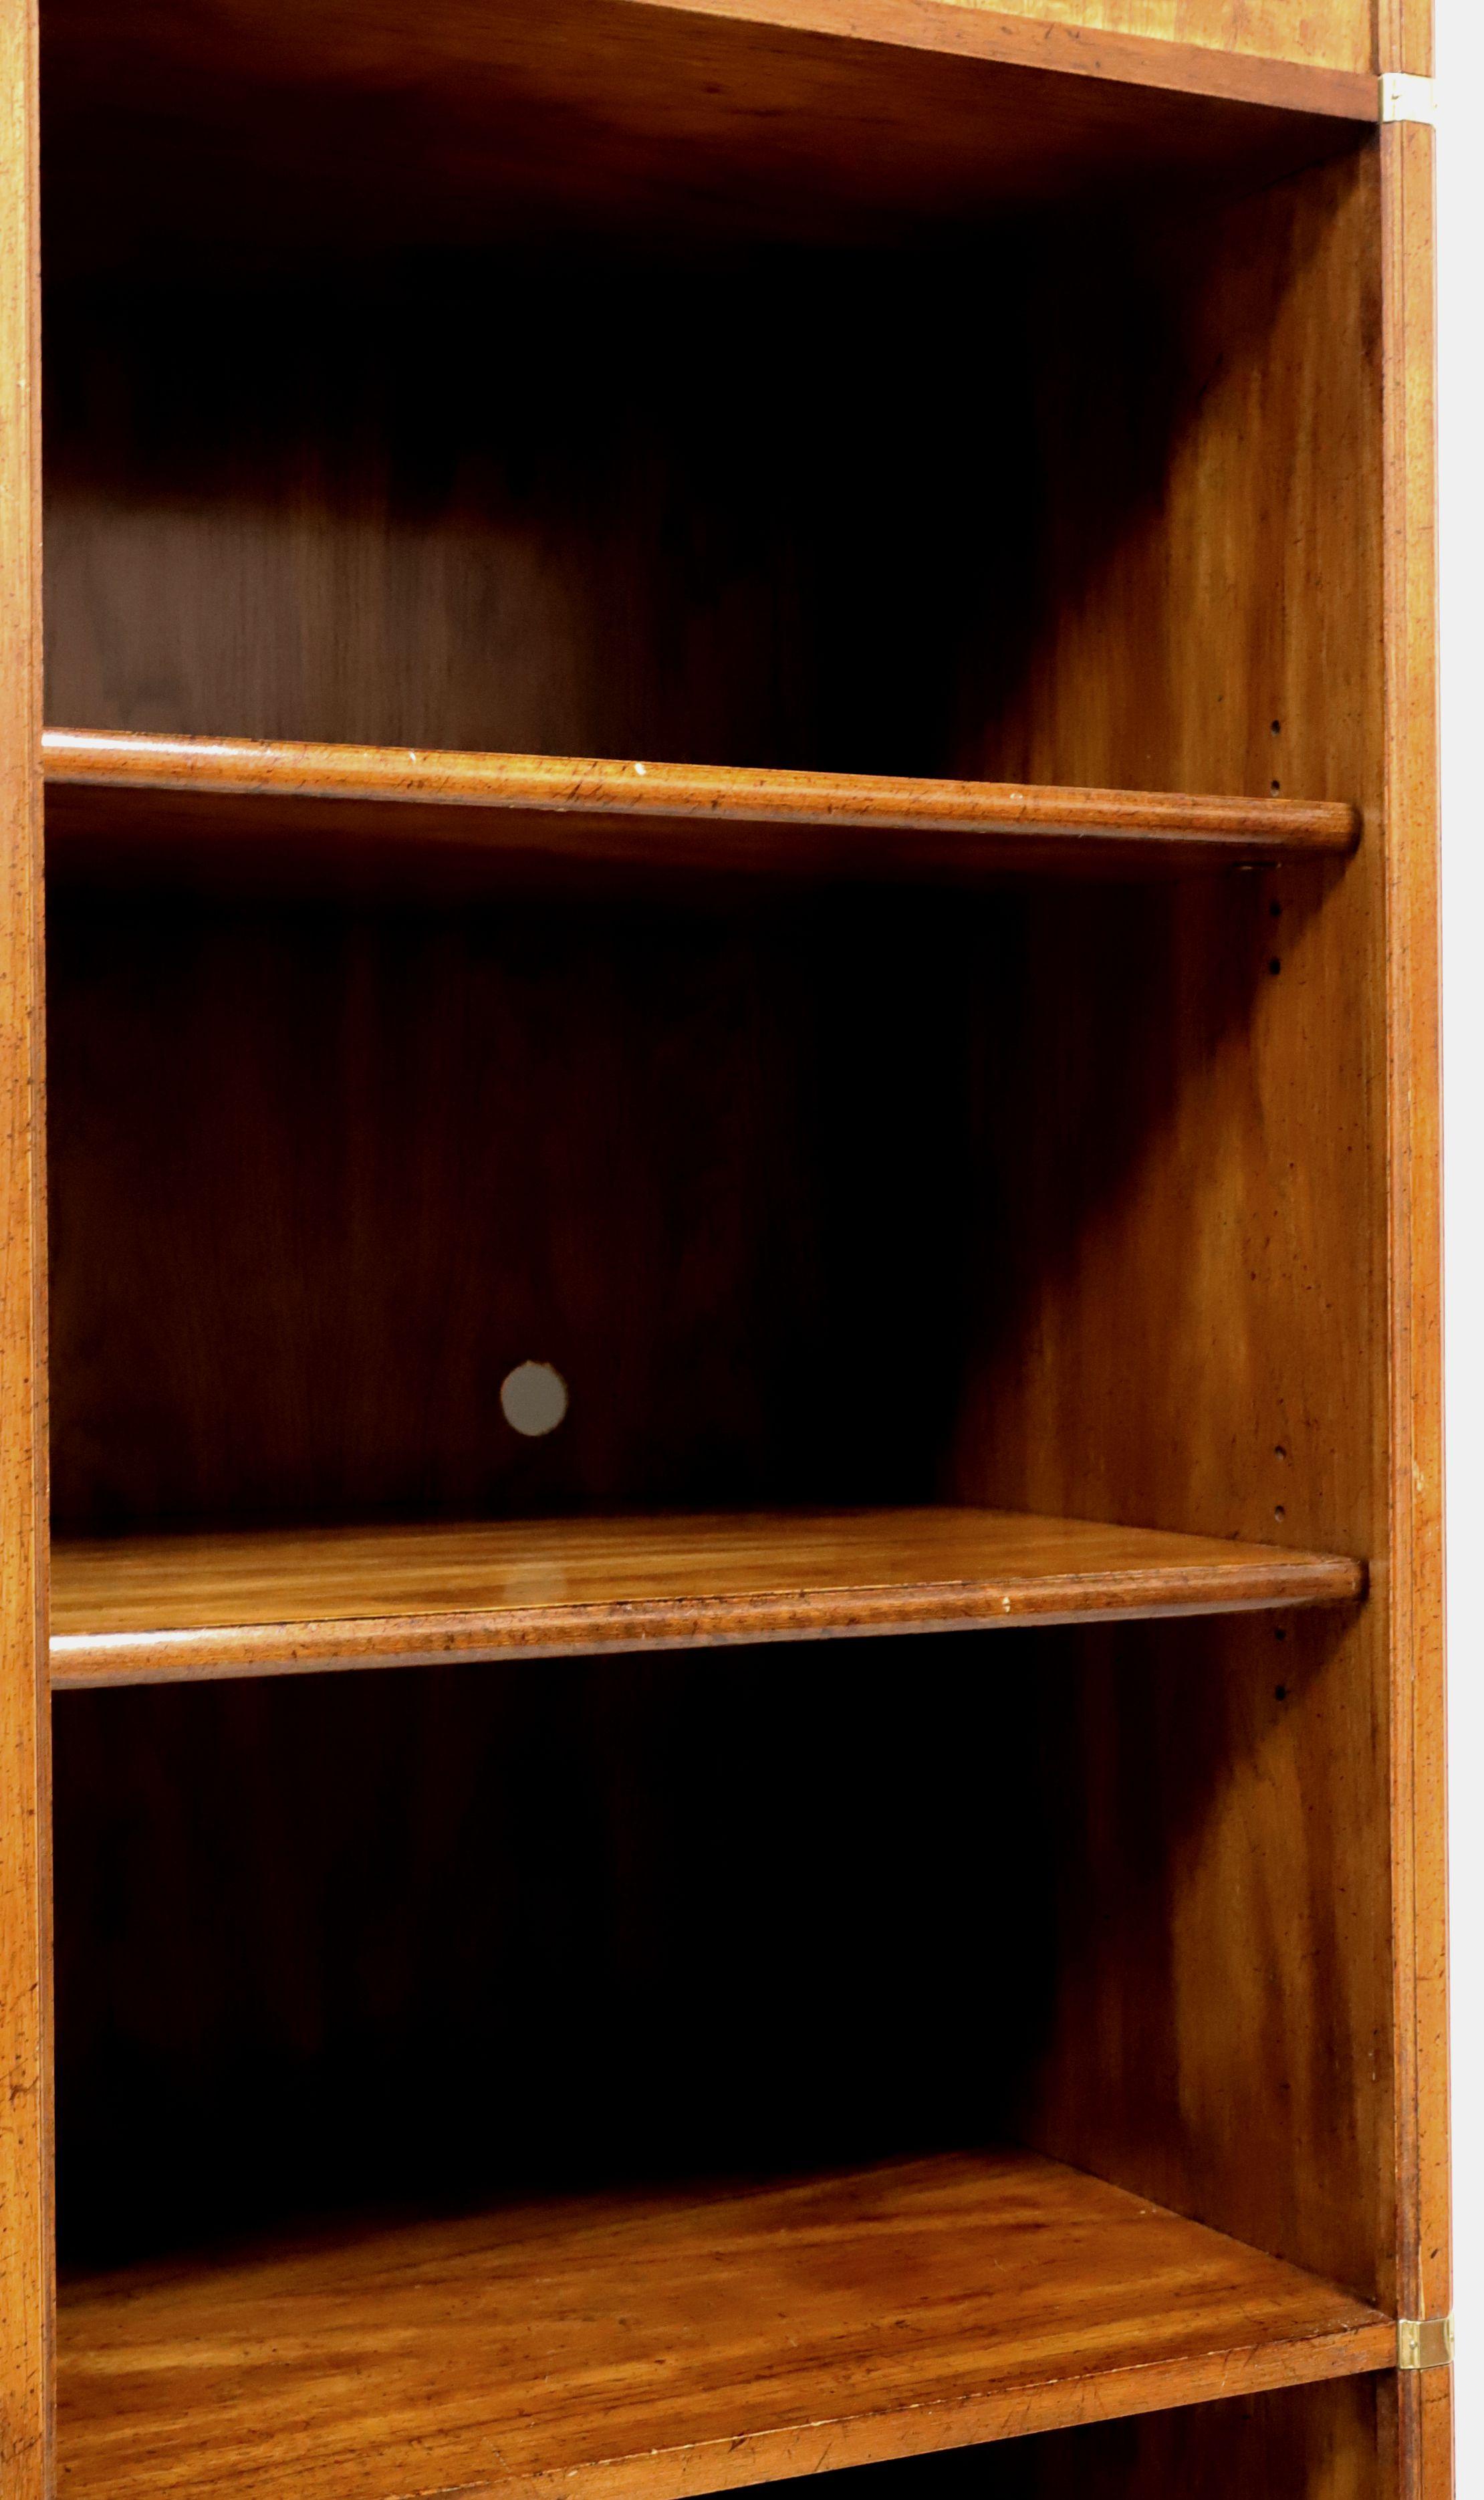 GORDON'S Late 20th Century Campaign Style Shelving Unit - B For Sale 1